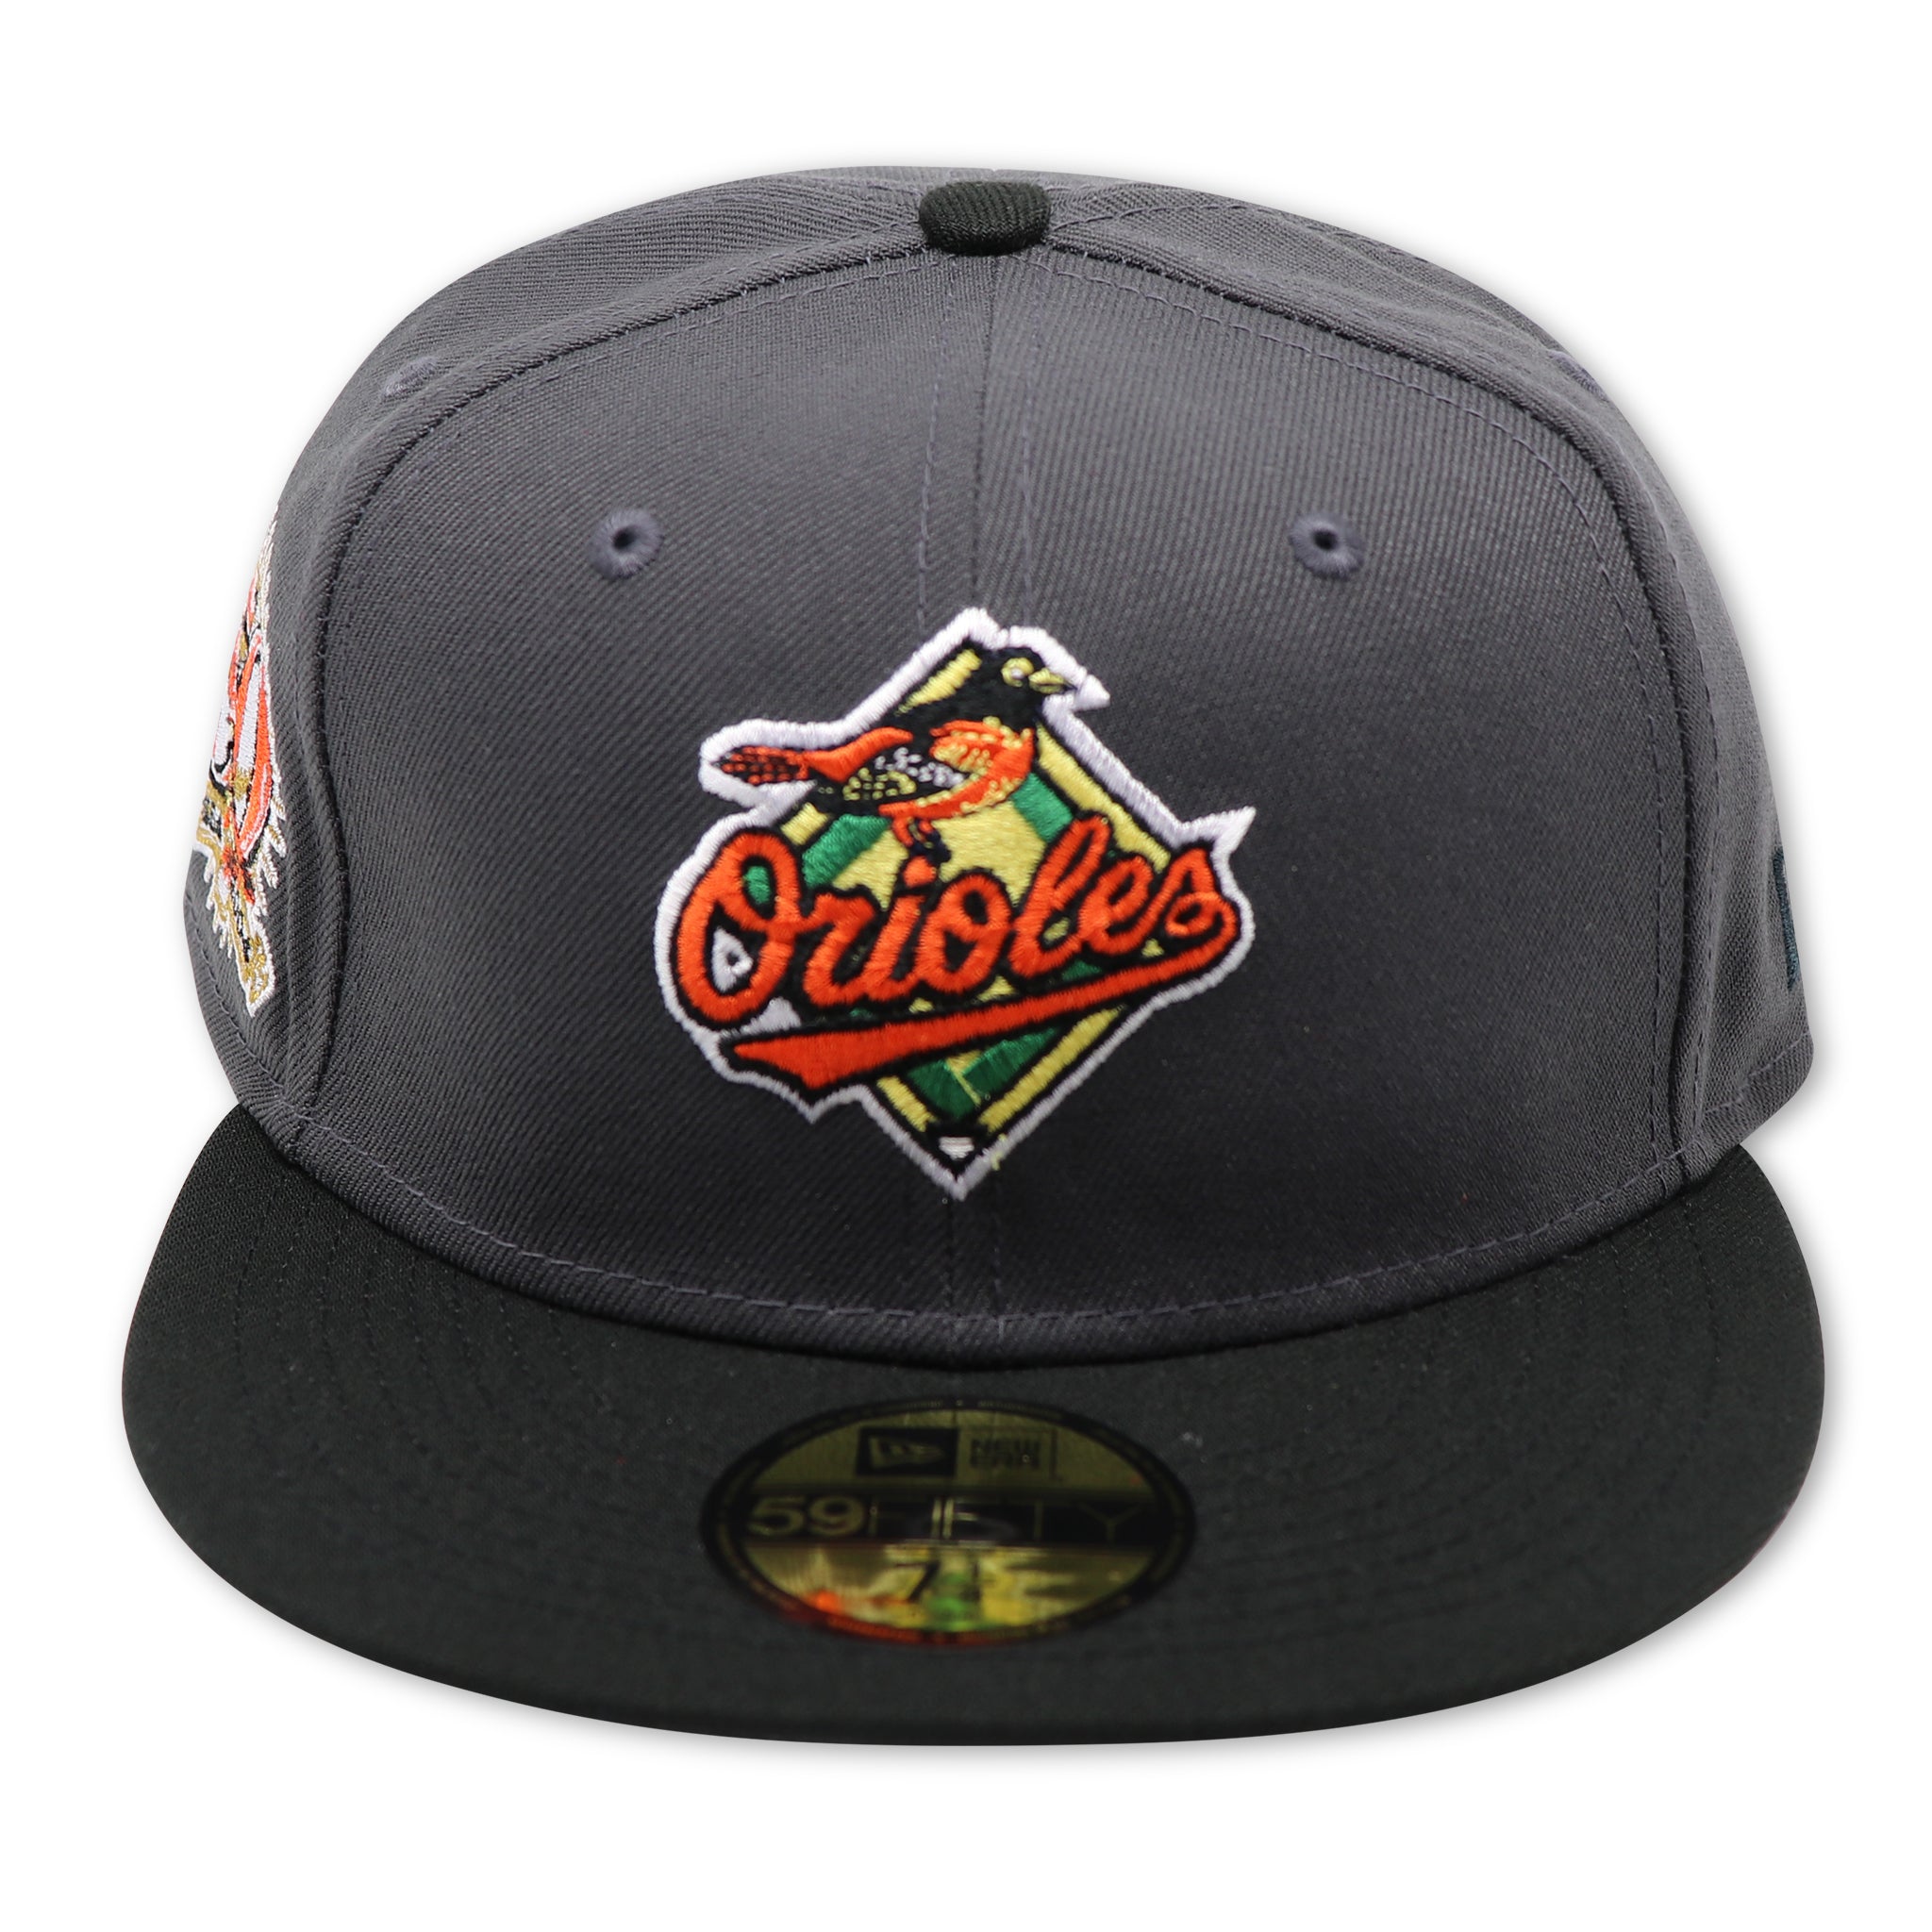 BALTIMORE ORIOLES (DK-GREY) (50TH ANNIVERSARY) NEW ERA 59FIFTY FITTED